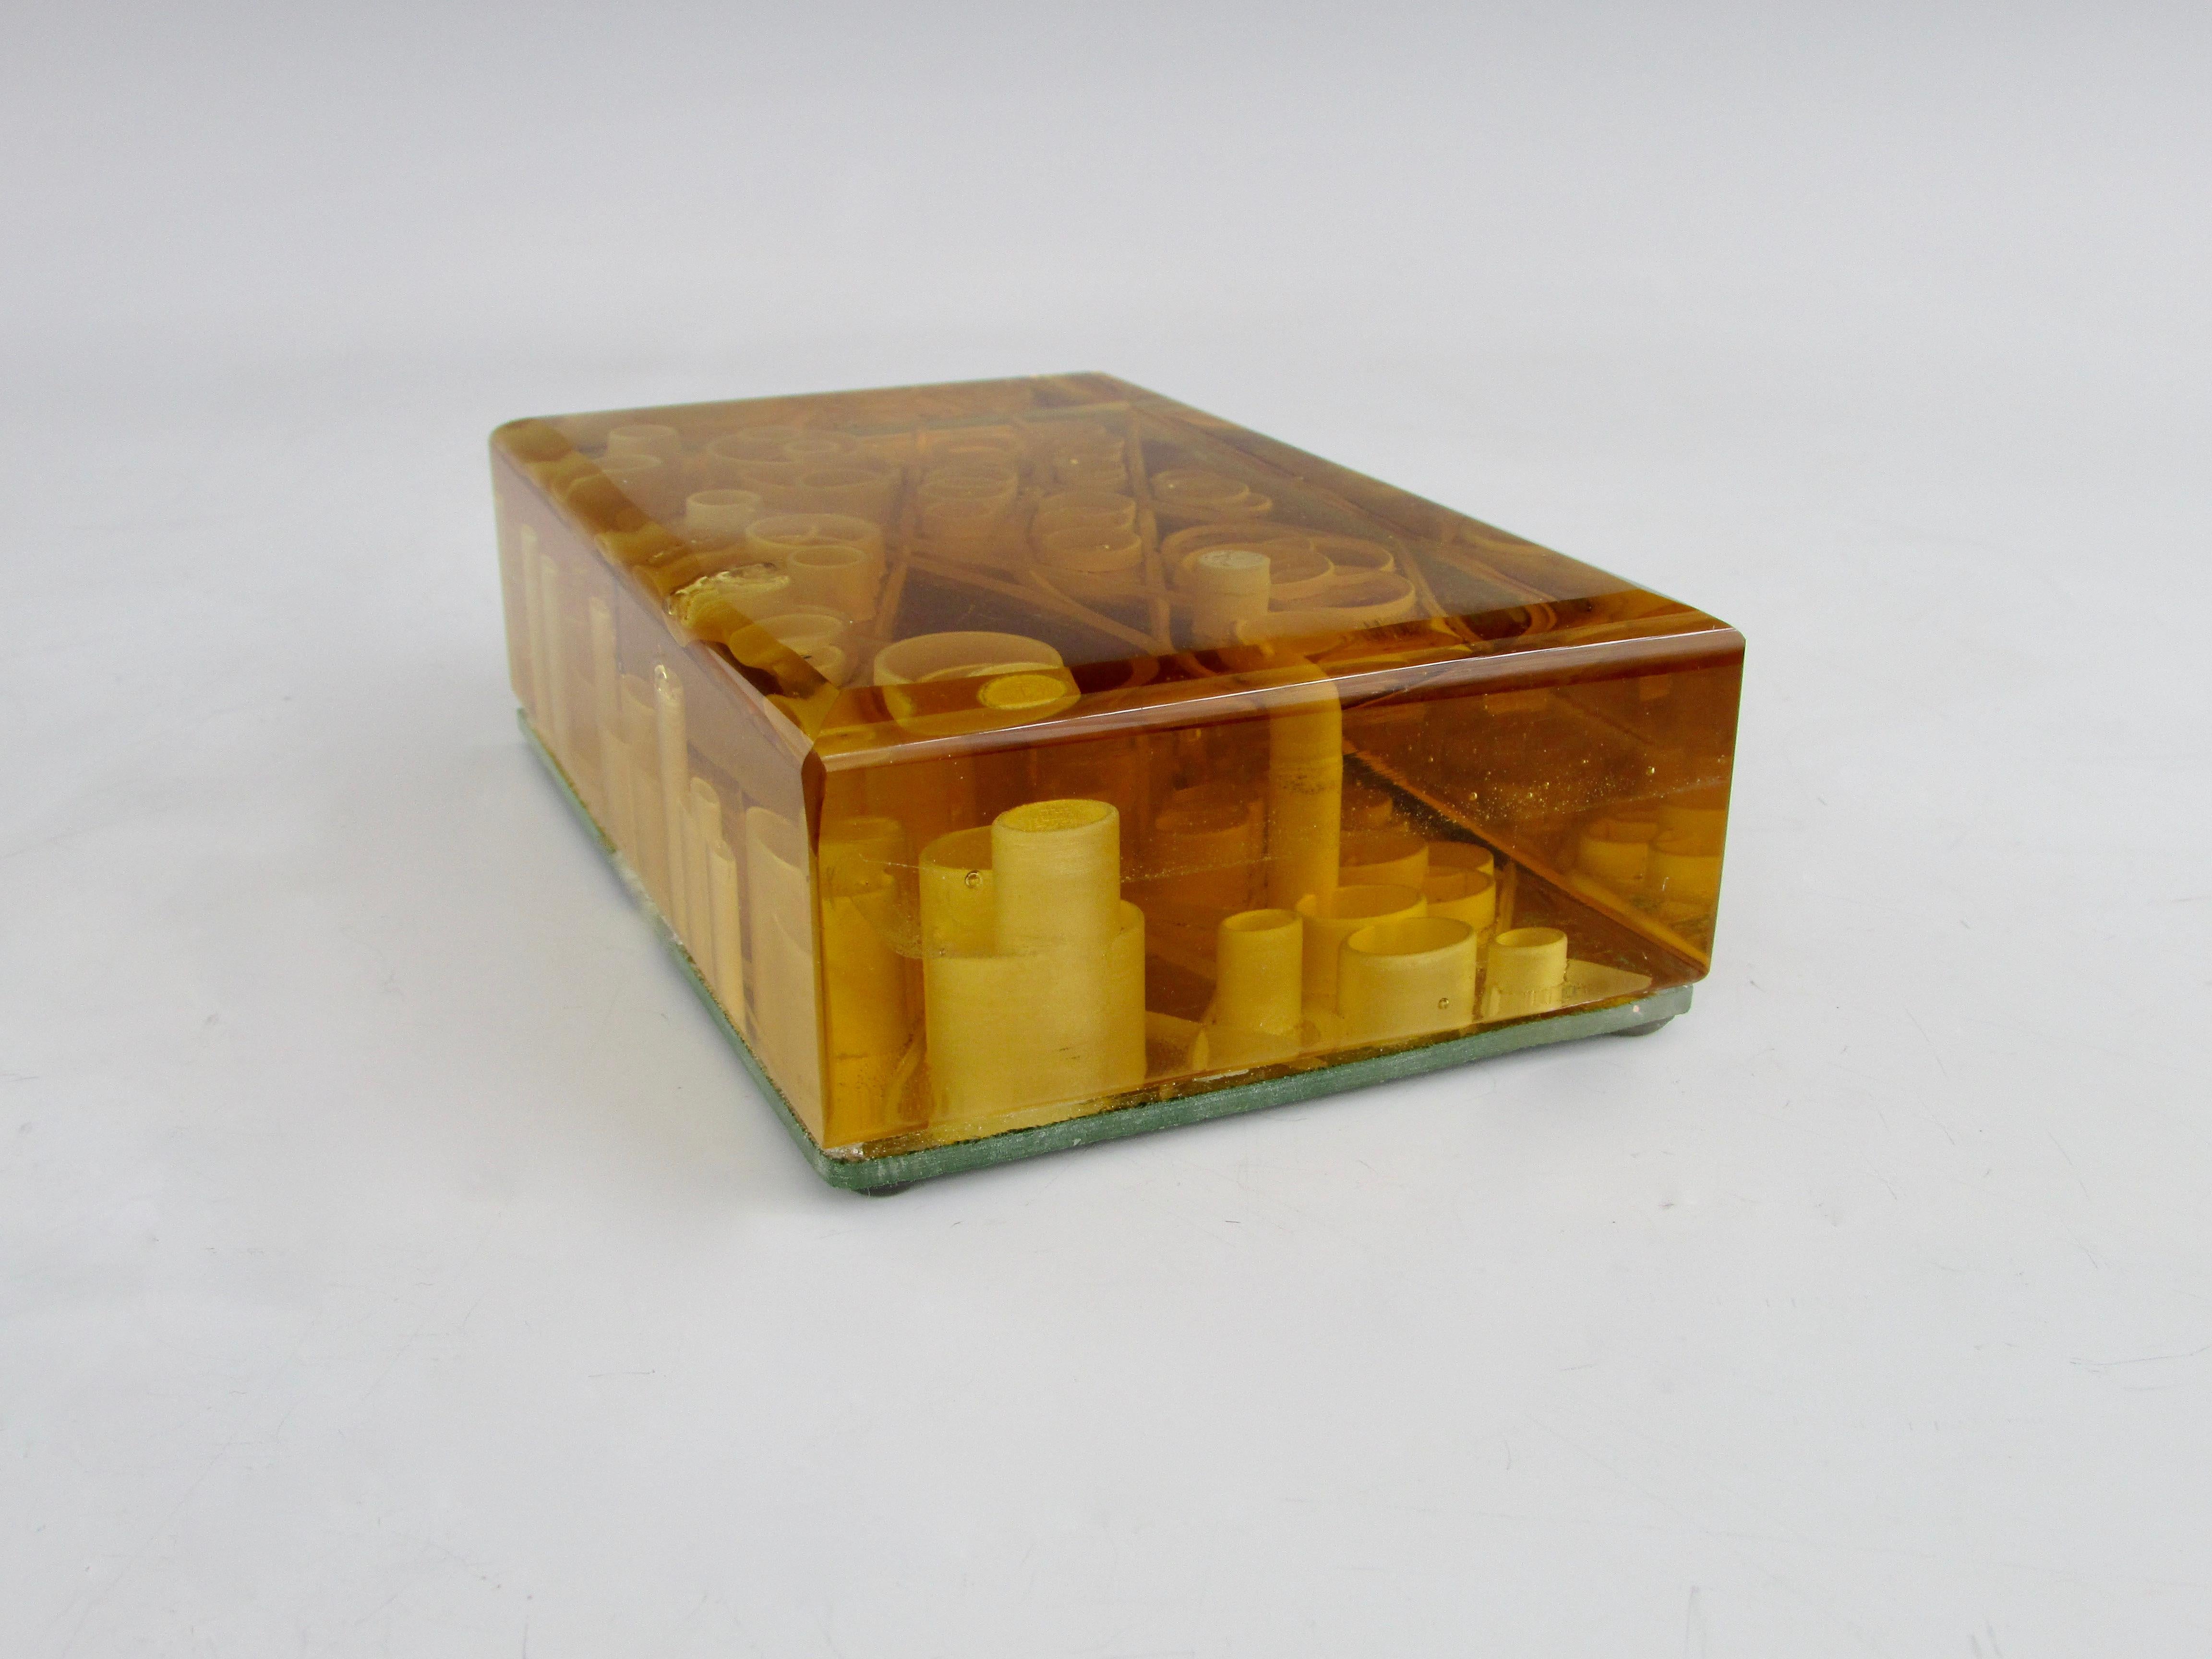 American Desk Top Construction in Glass Sculpture Paperweight